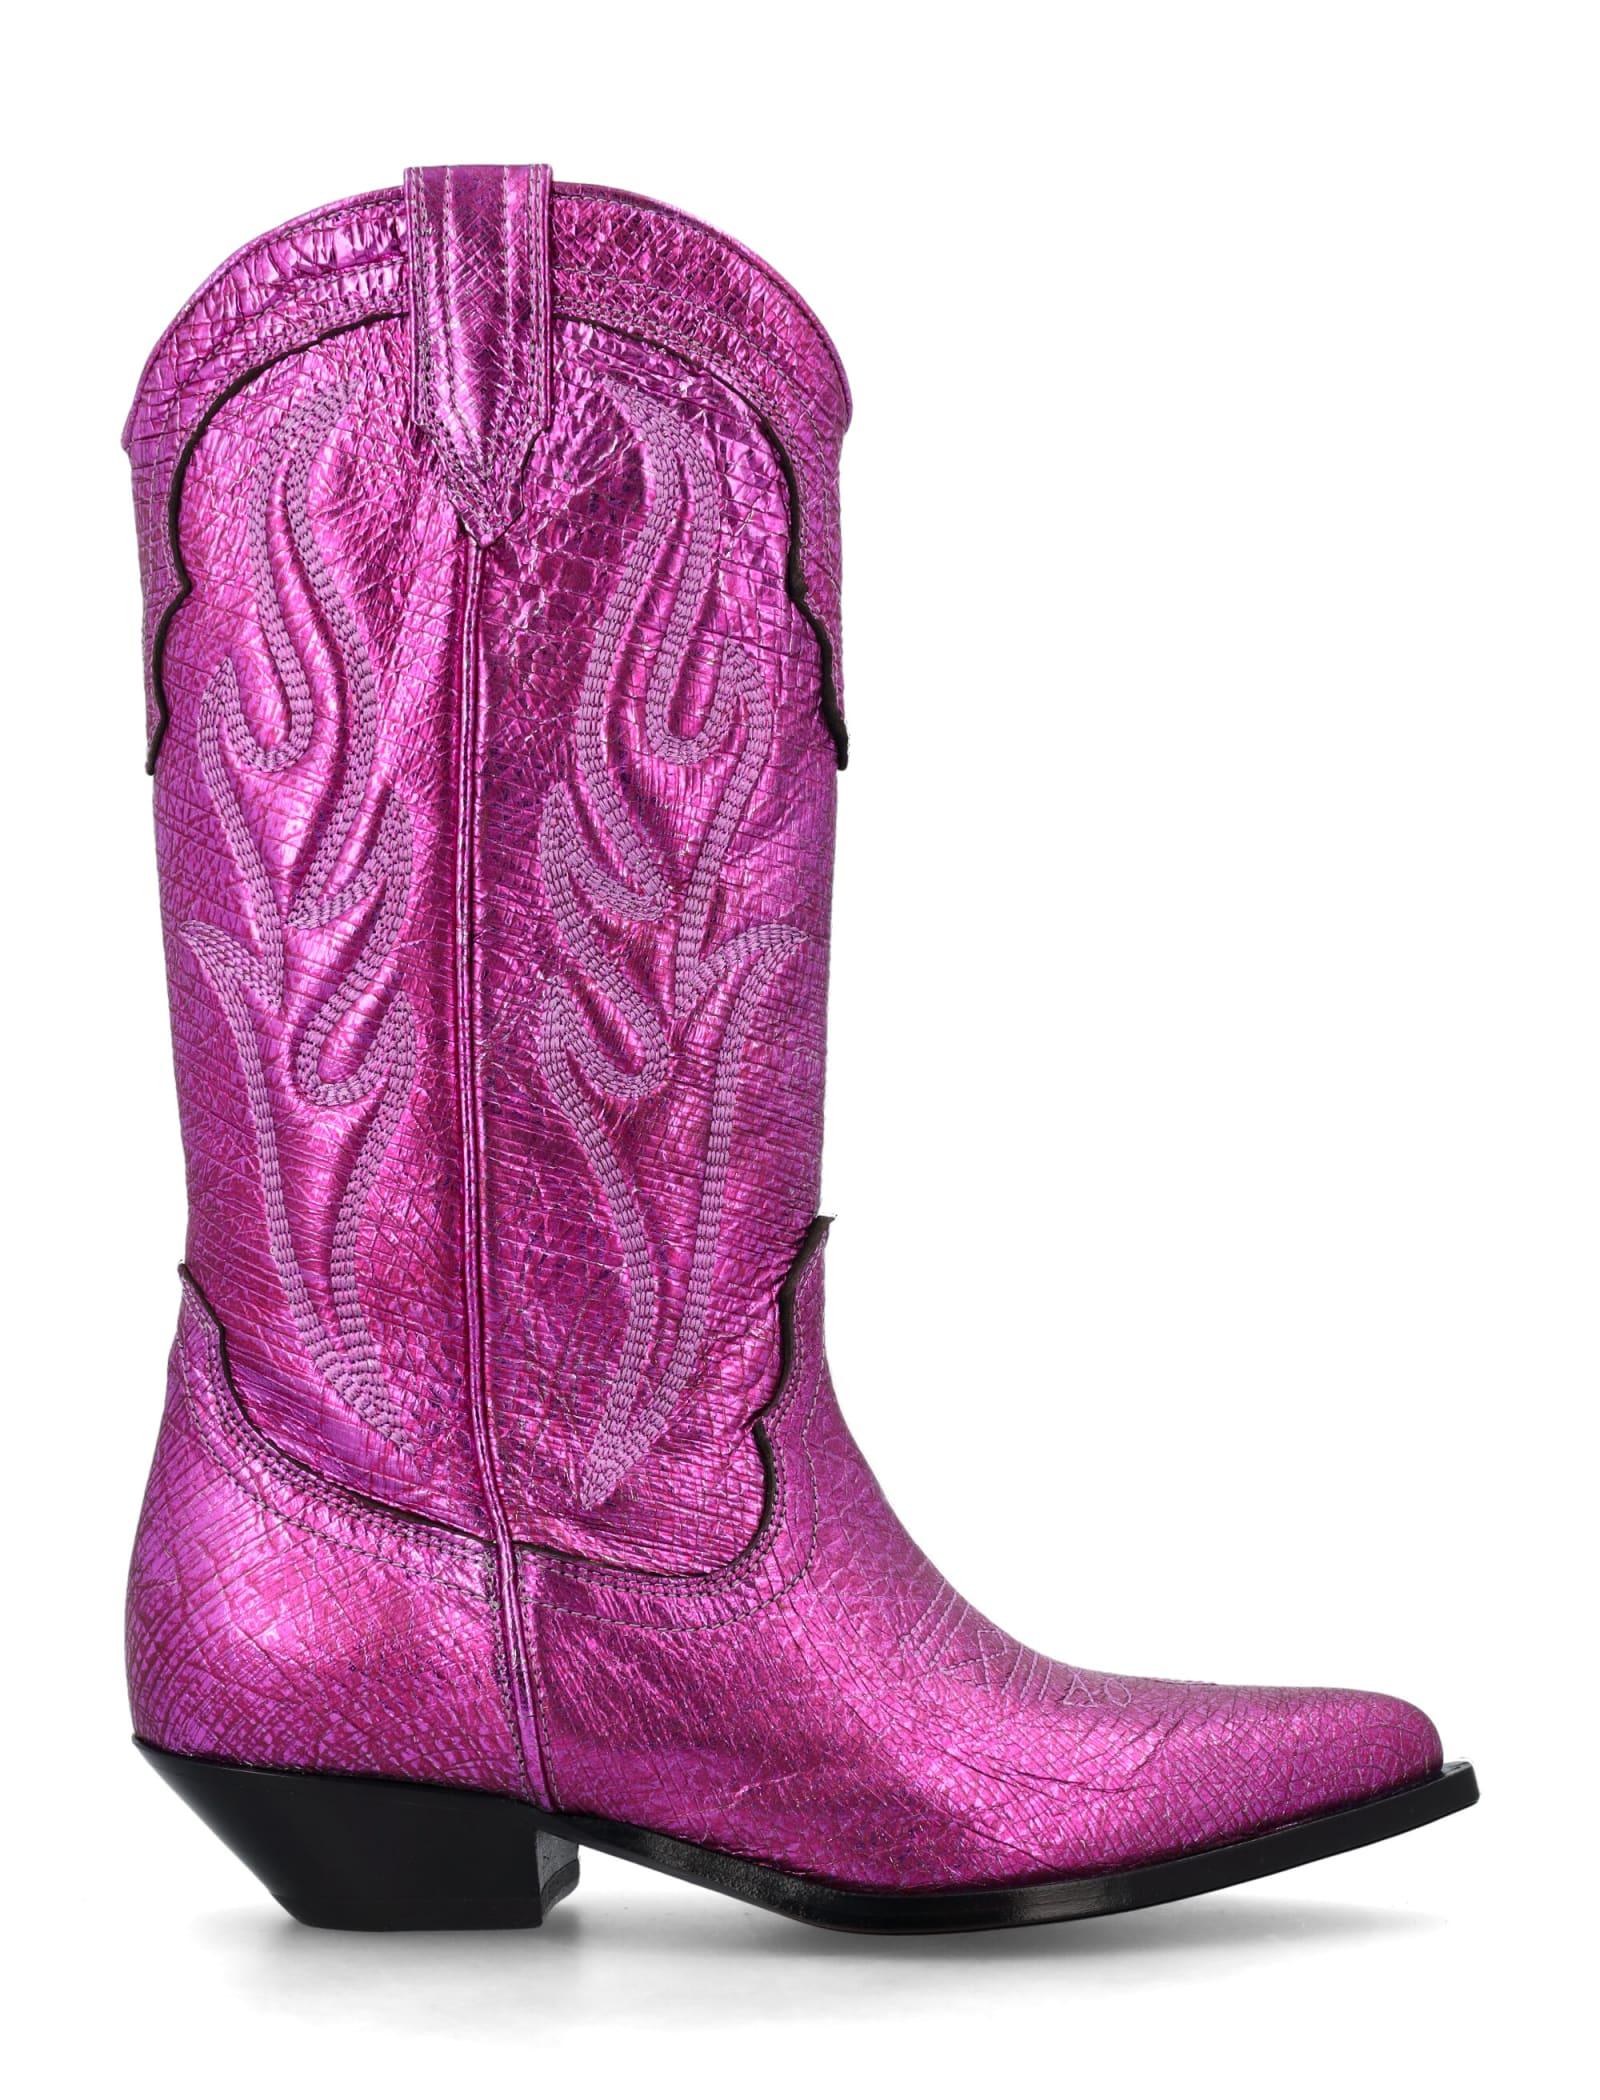 Sonora Boots Santa Fe Laminated Cowboy Boot in Purple | Lyst